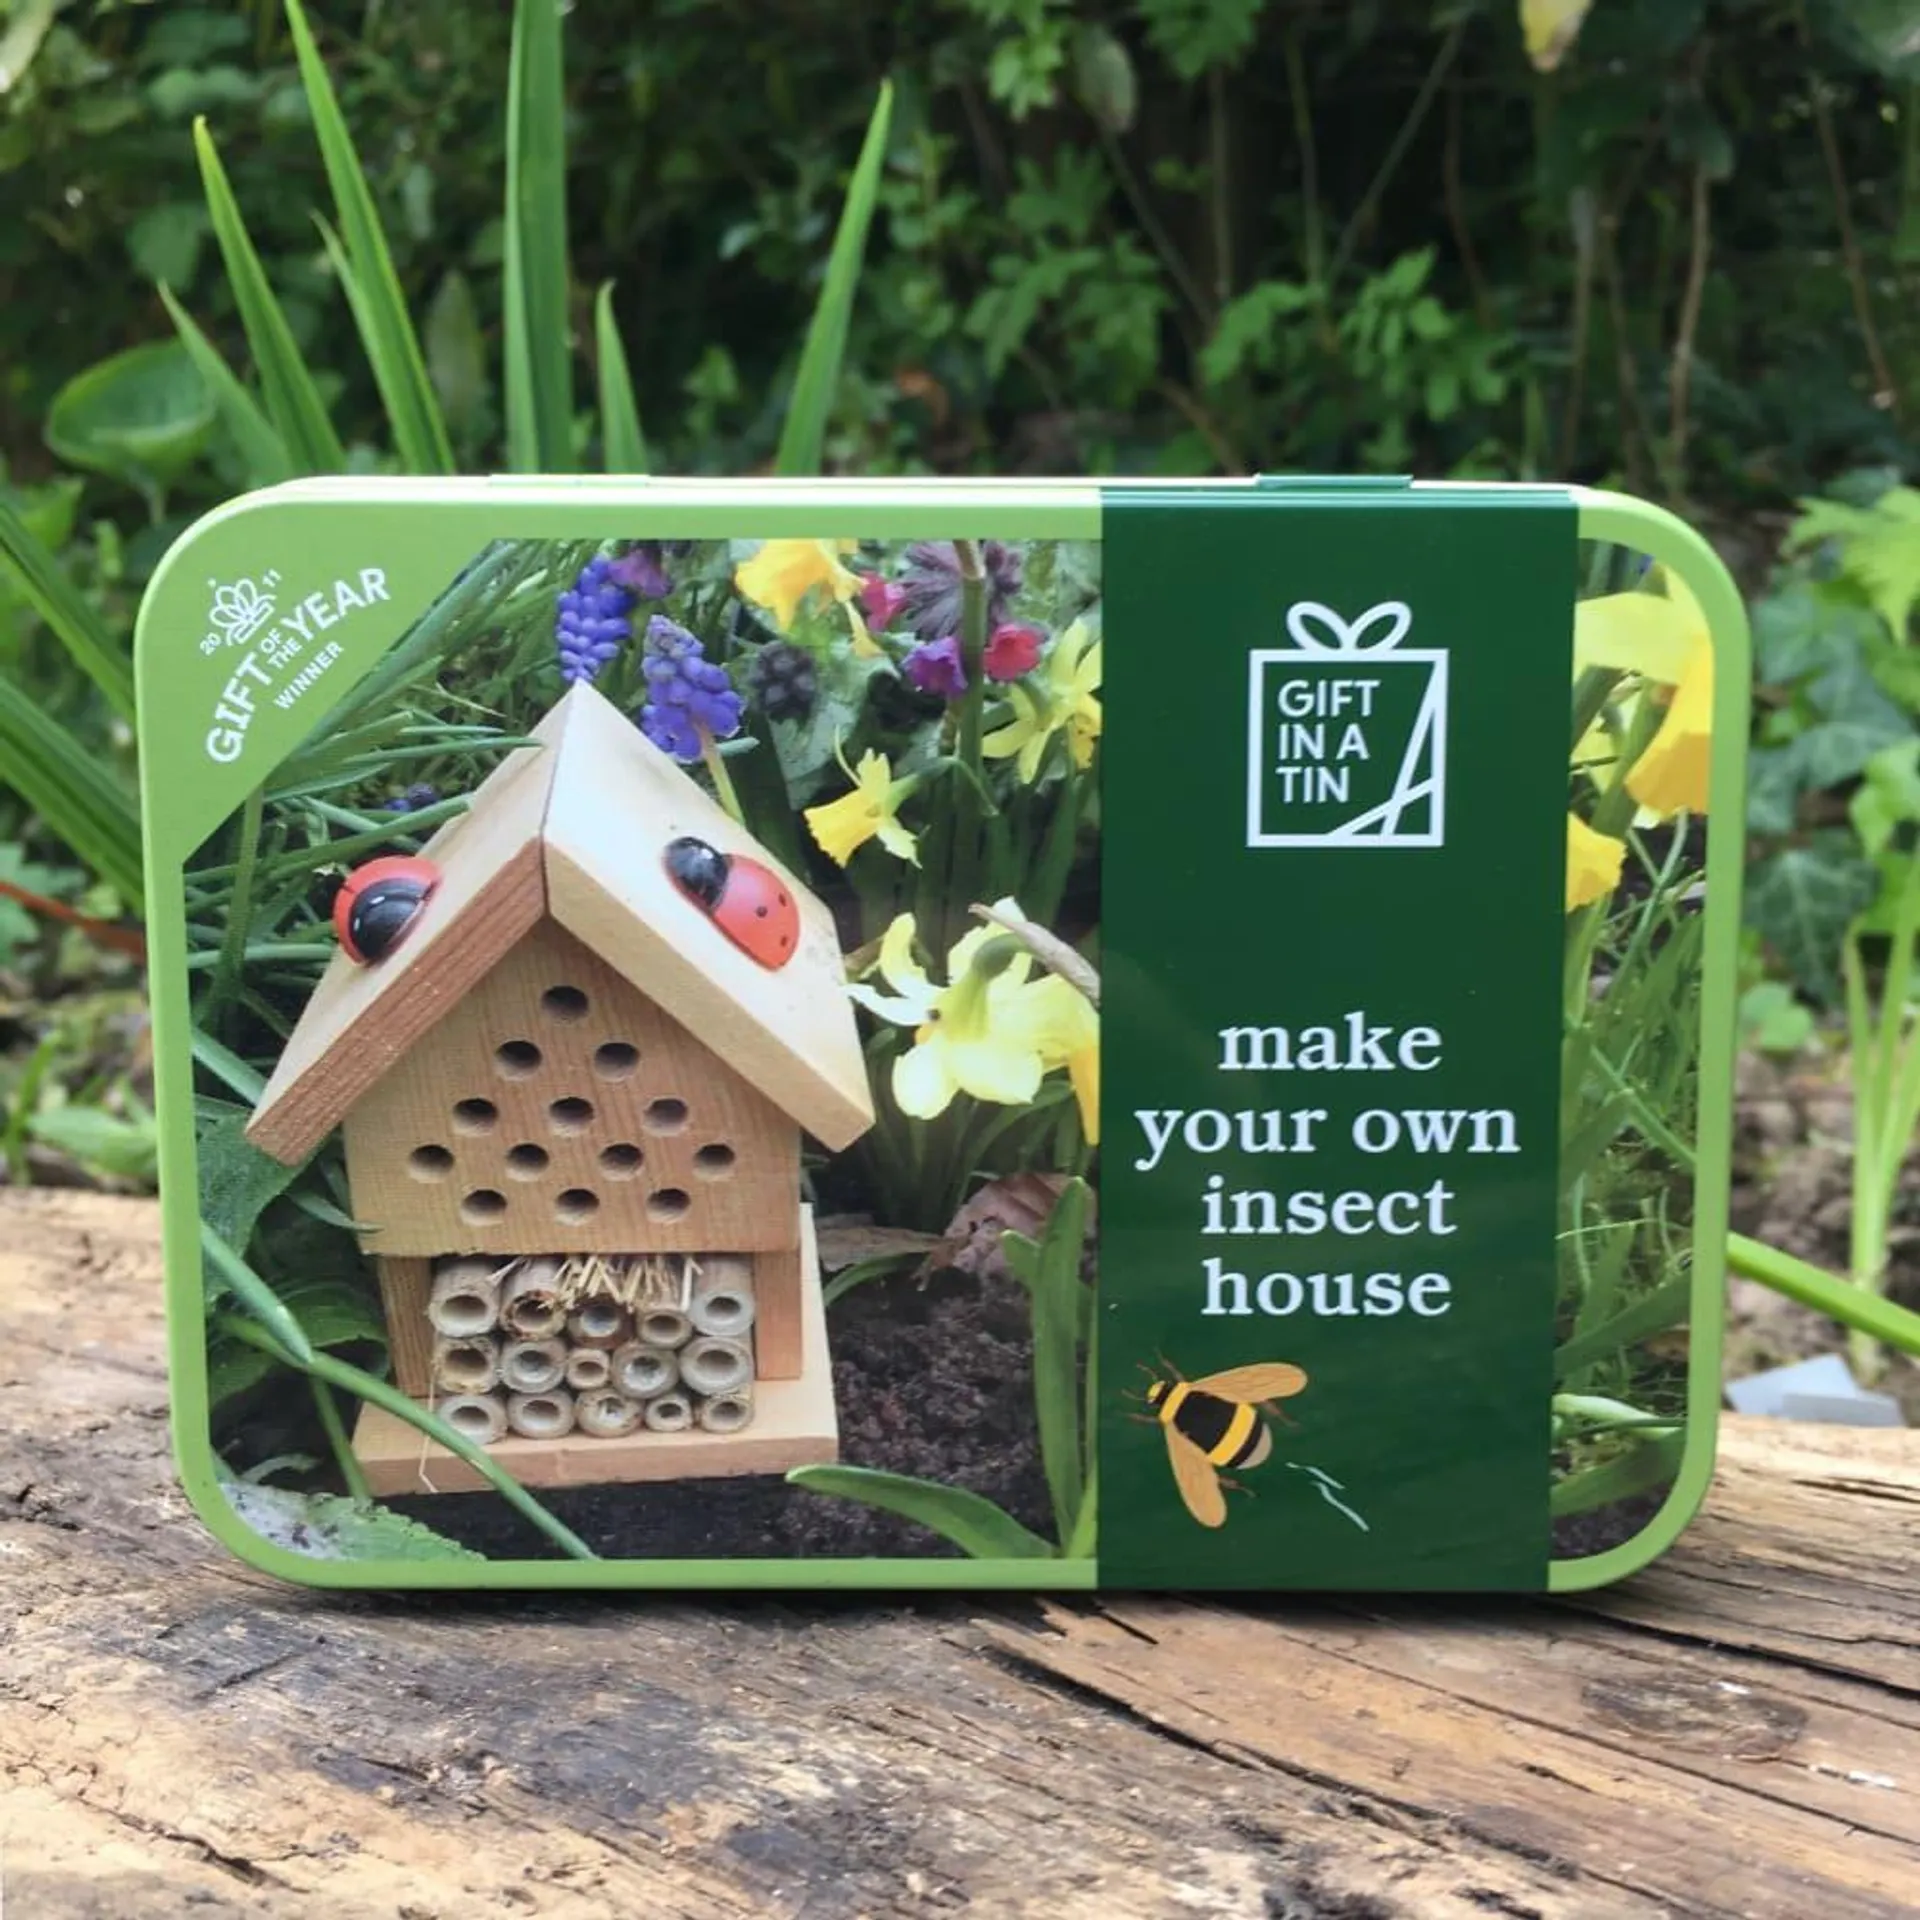 Make your own Insect House Gift in a Tin